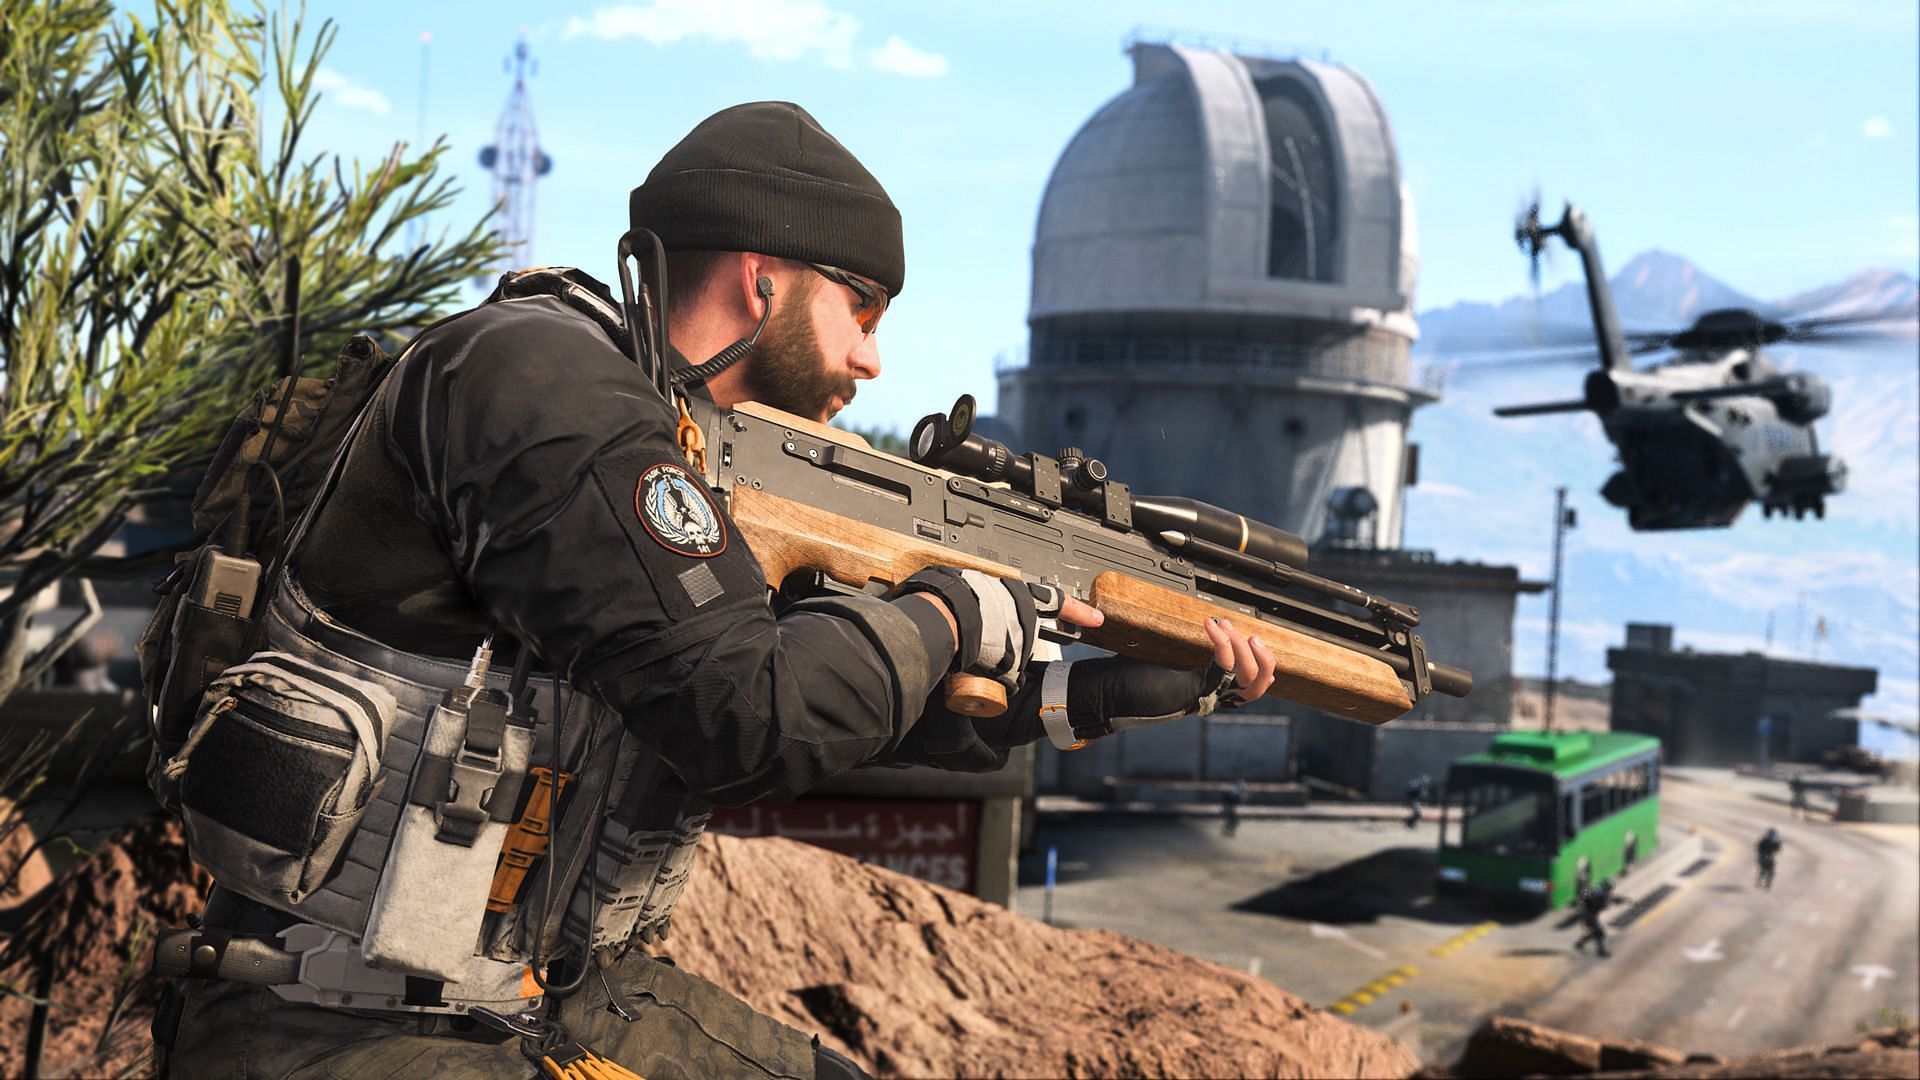 Big Capture the Flag is coming to Modern Warfare 2 in Season 5 (Image via Activision)